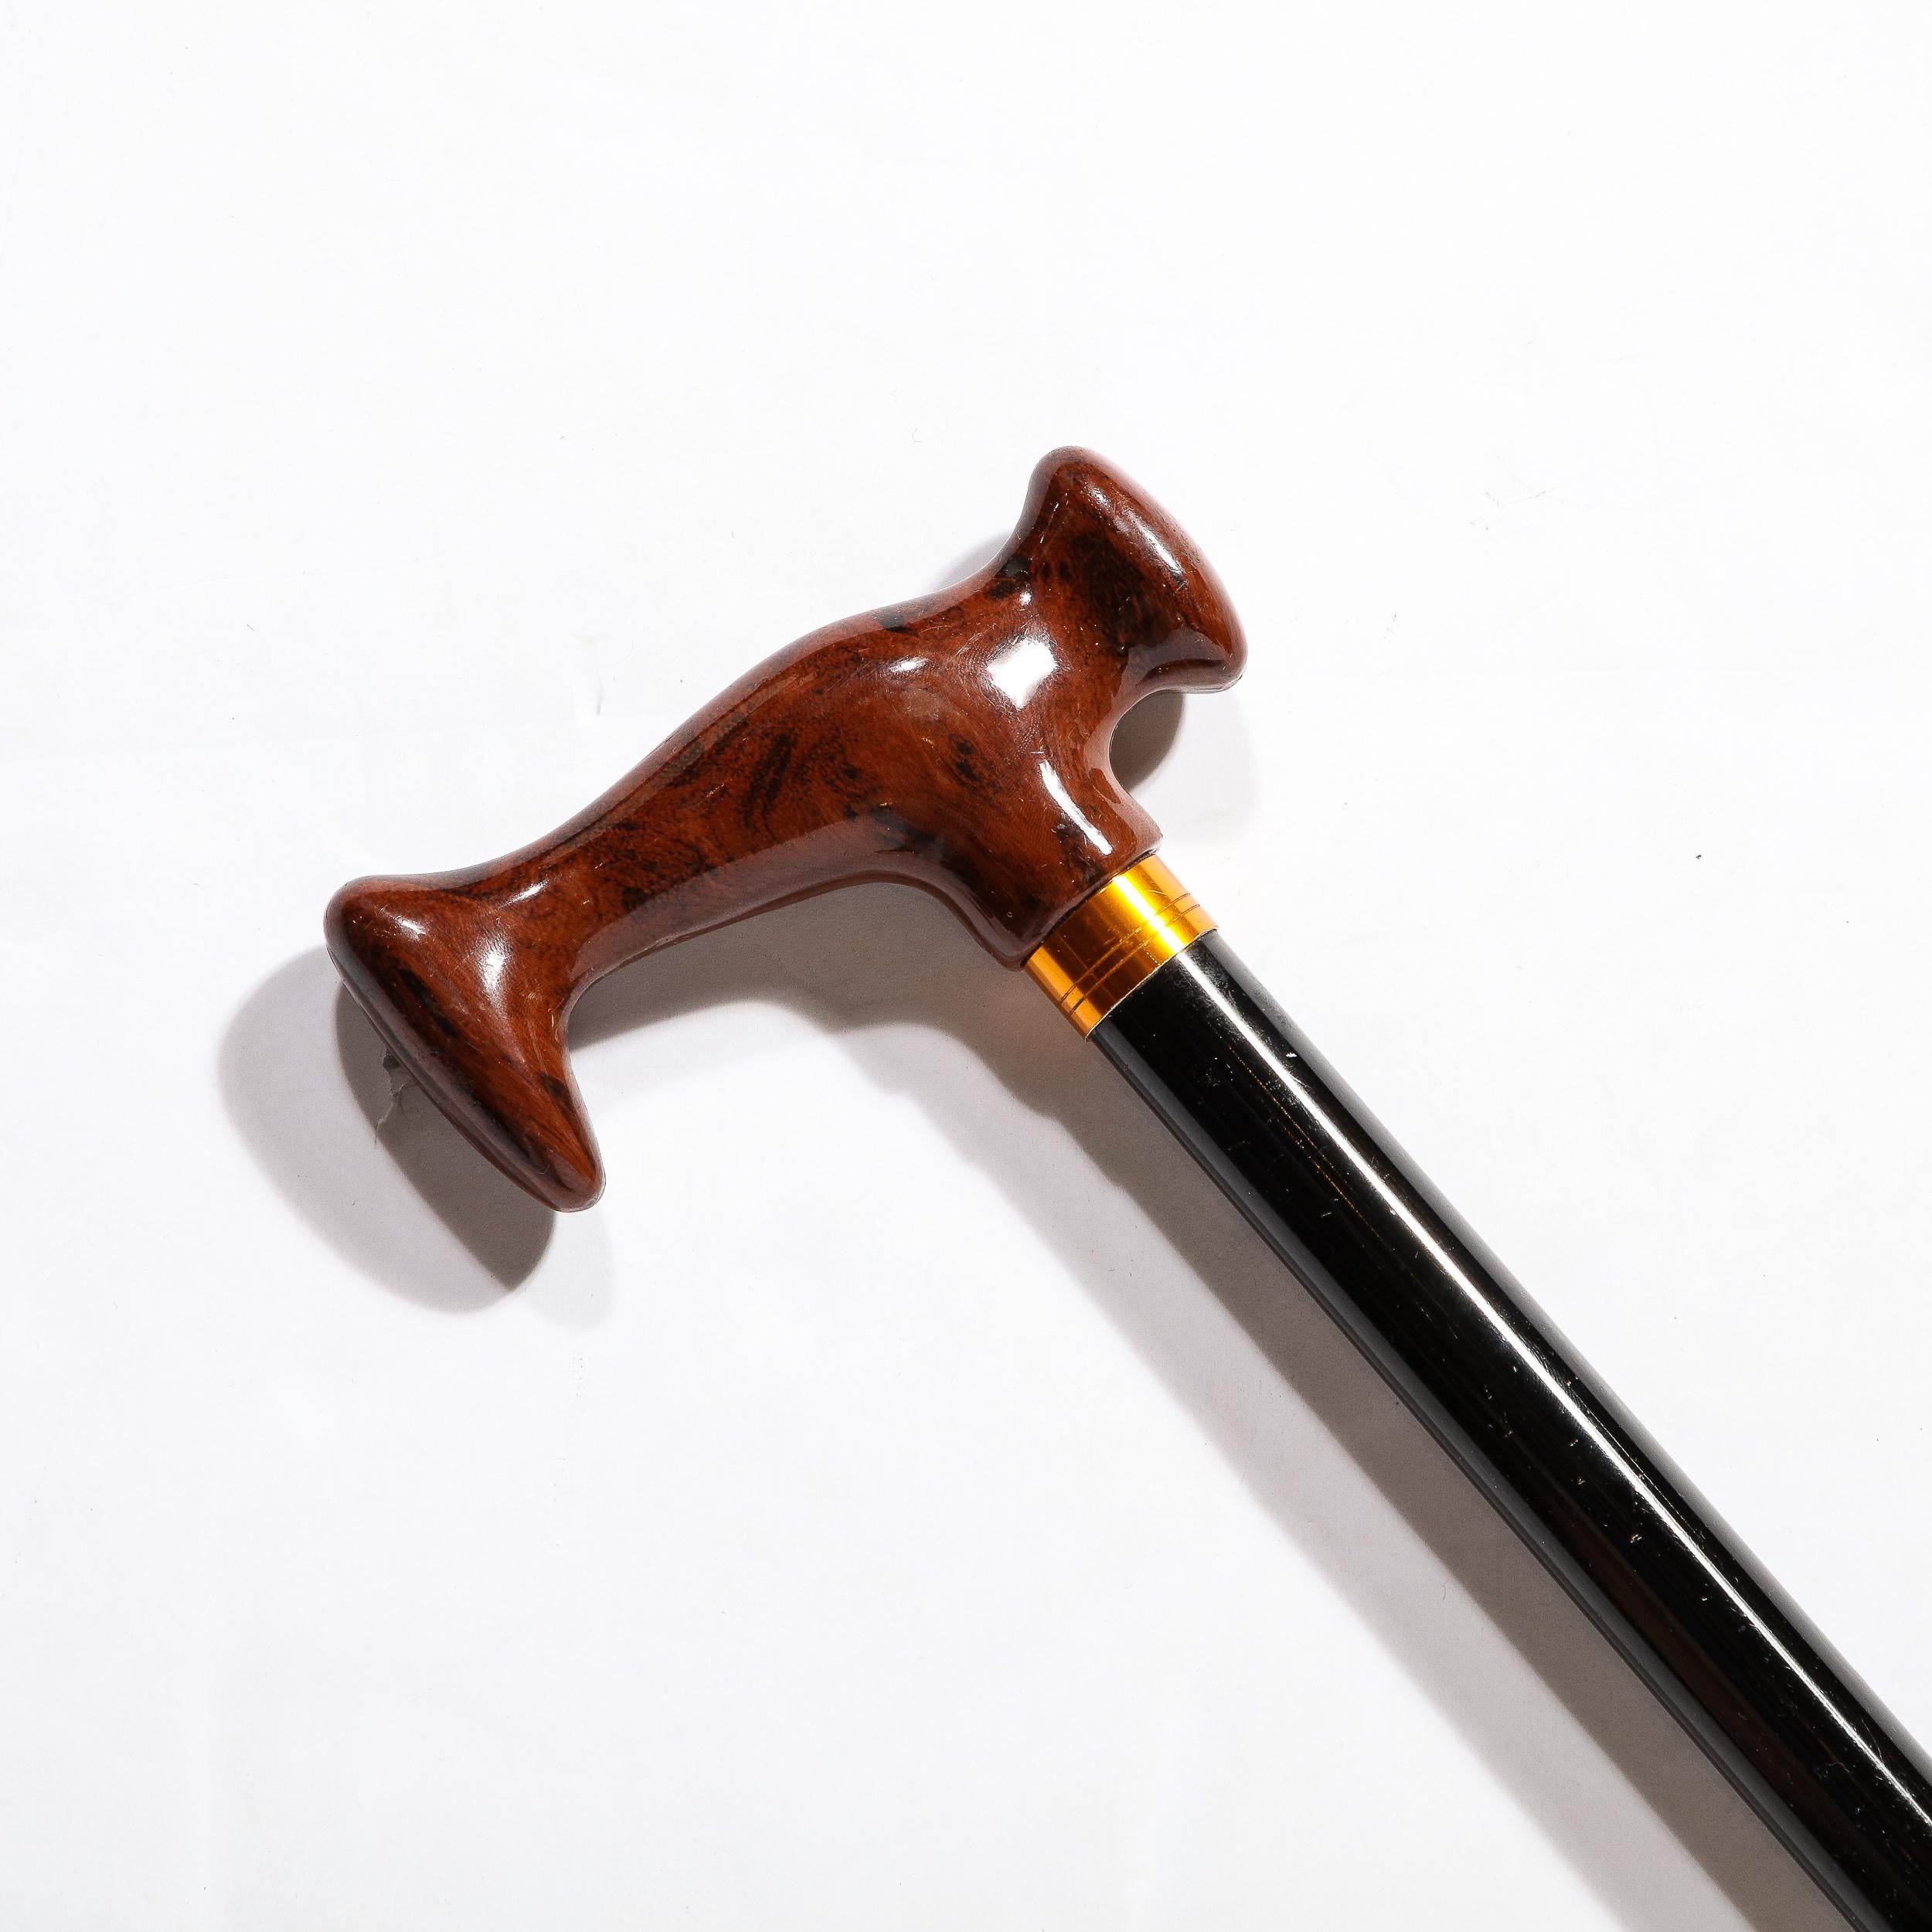 This Walking Stick in Faux Walnut and black enamel originates from the United States during the 20th Century. Features a lovely sculptural handle in faux walnut, leading to a brass fitting at the neck above the black enameled body. The height can be